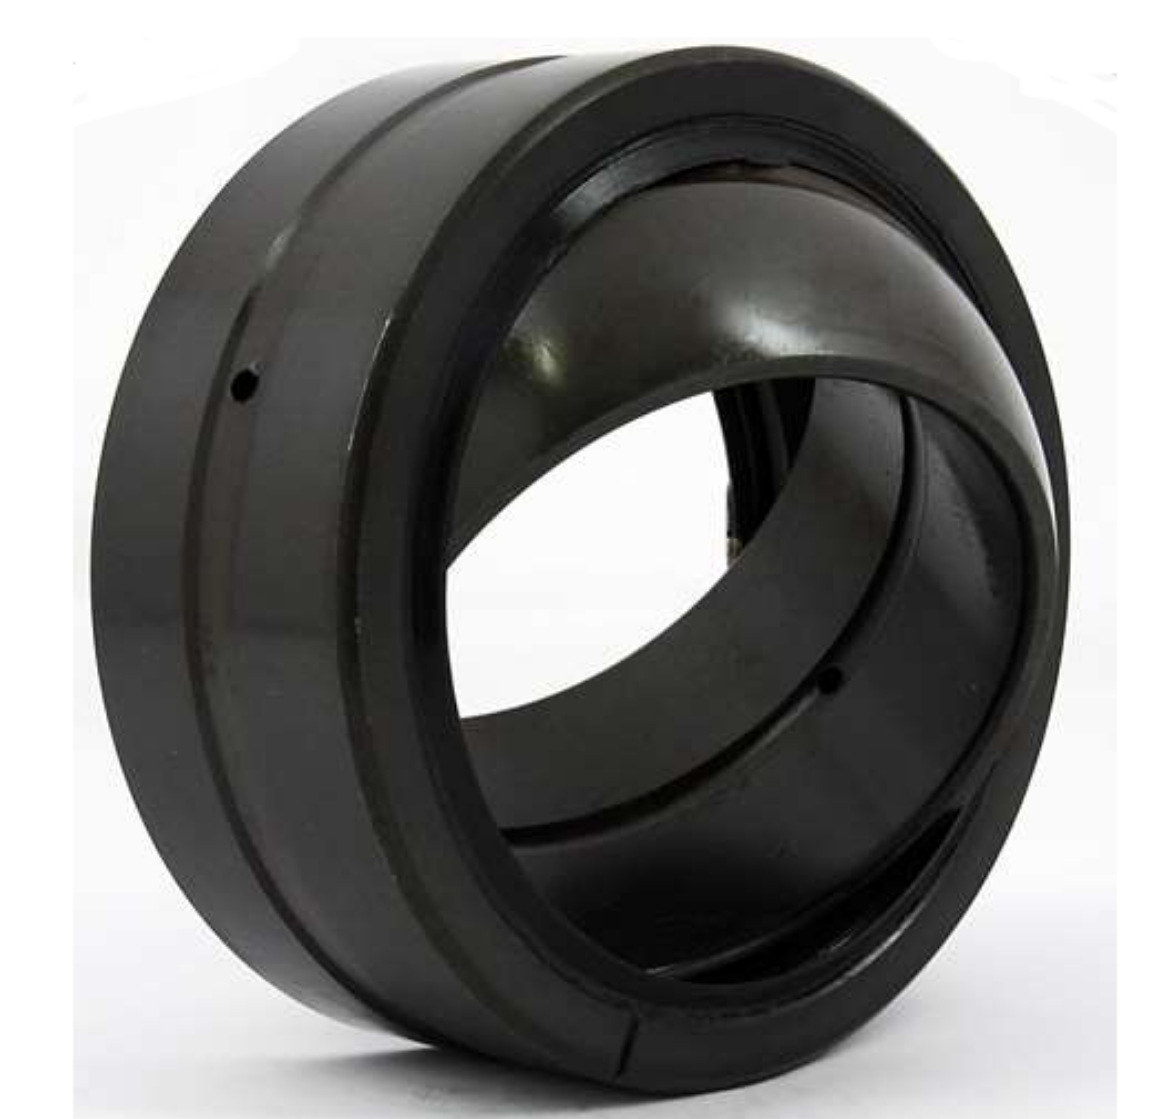 Picture of BALL BUSHING BRG SPH PLN 61.913X 28.575X33.325MM S38.10 GE38ZO2RS